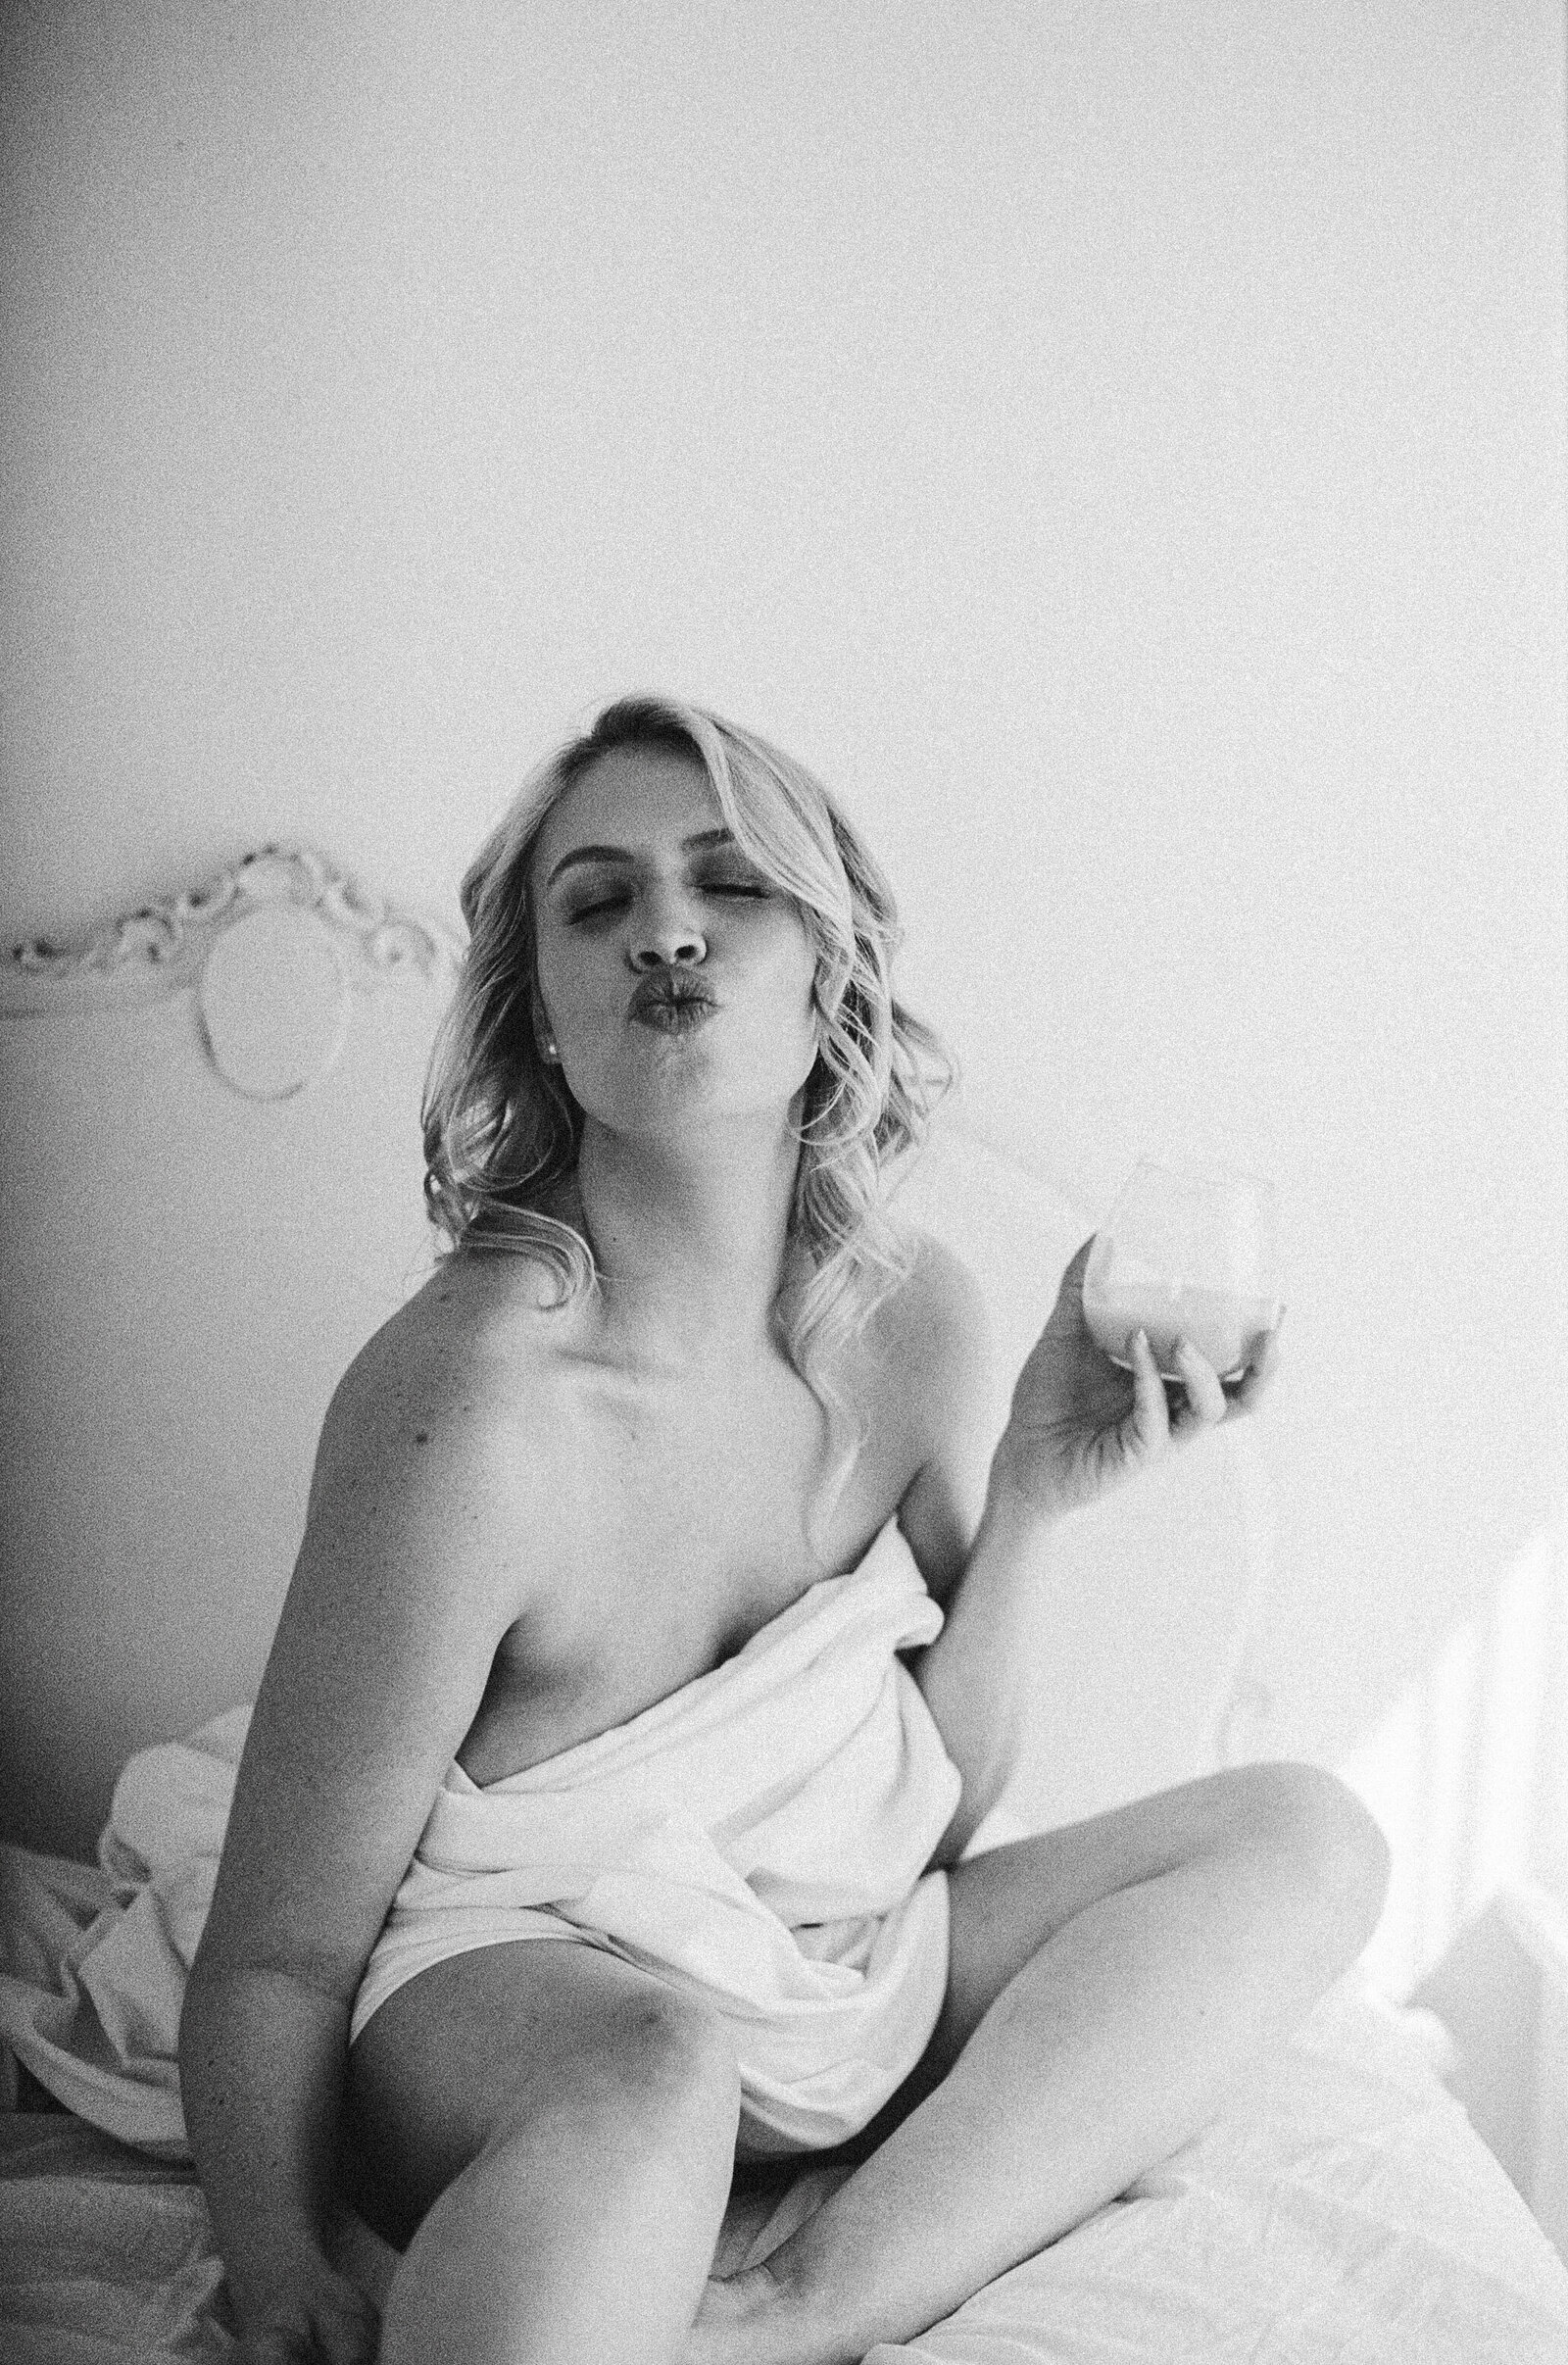 Black and white boudoir photo of a woman kissing at the camera